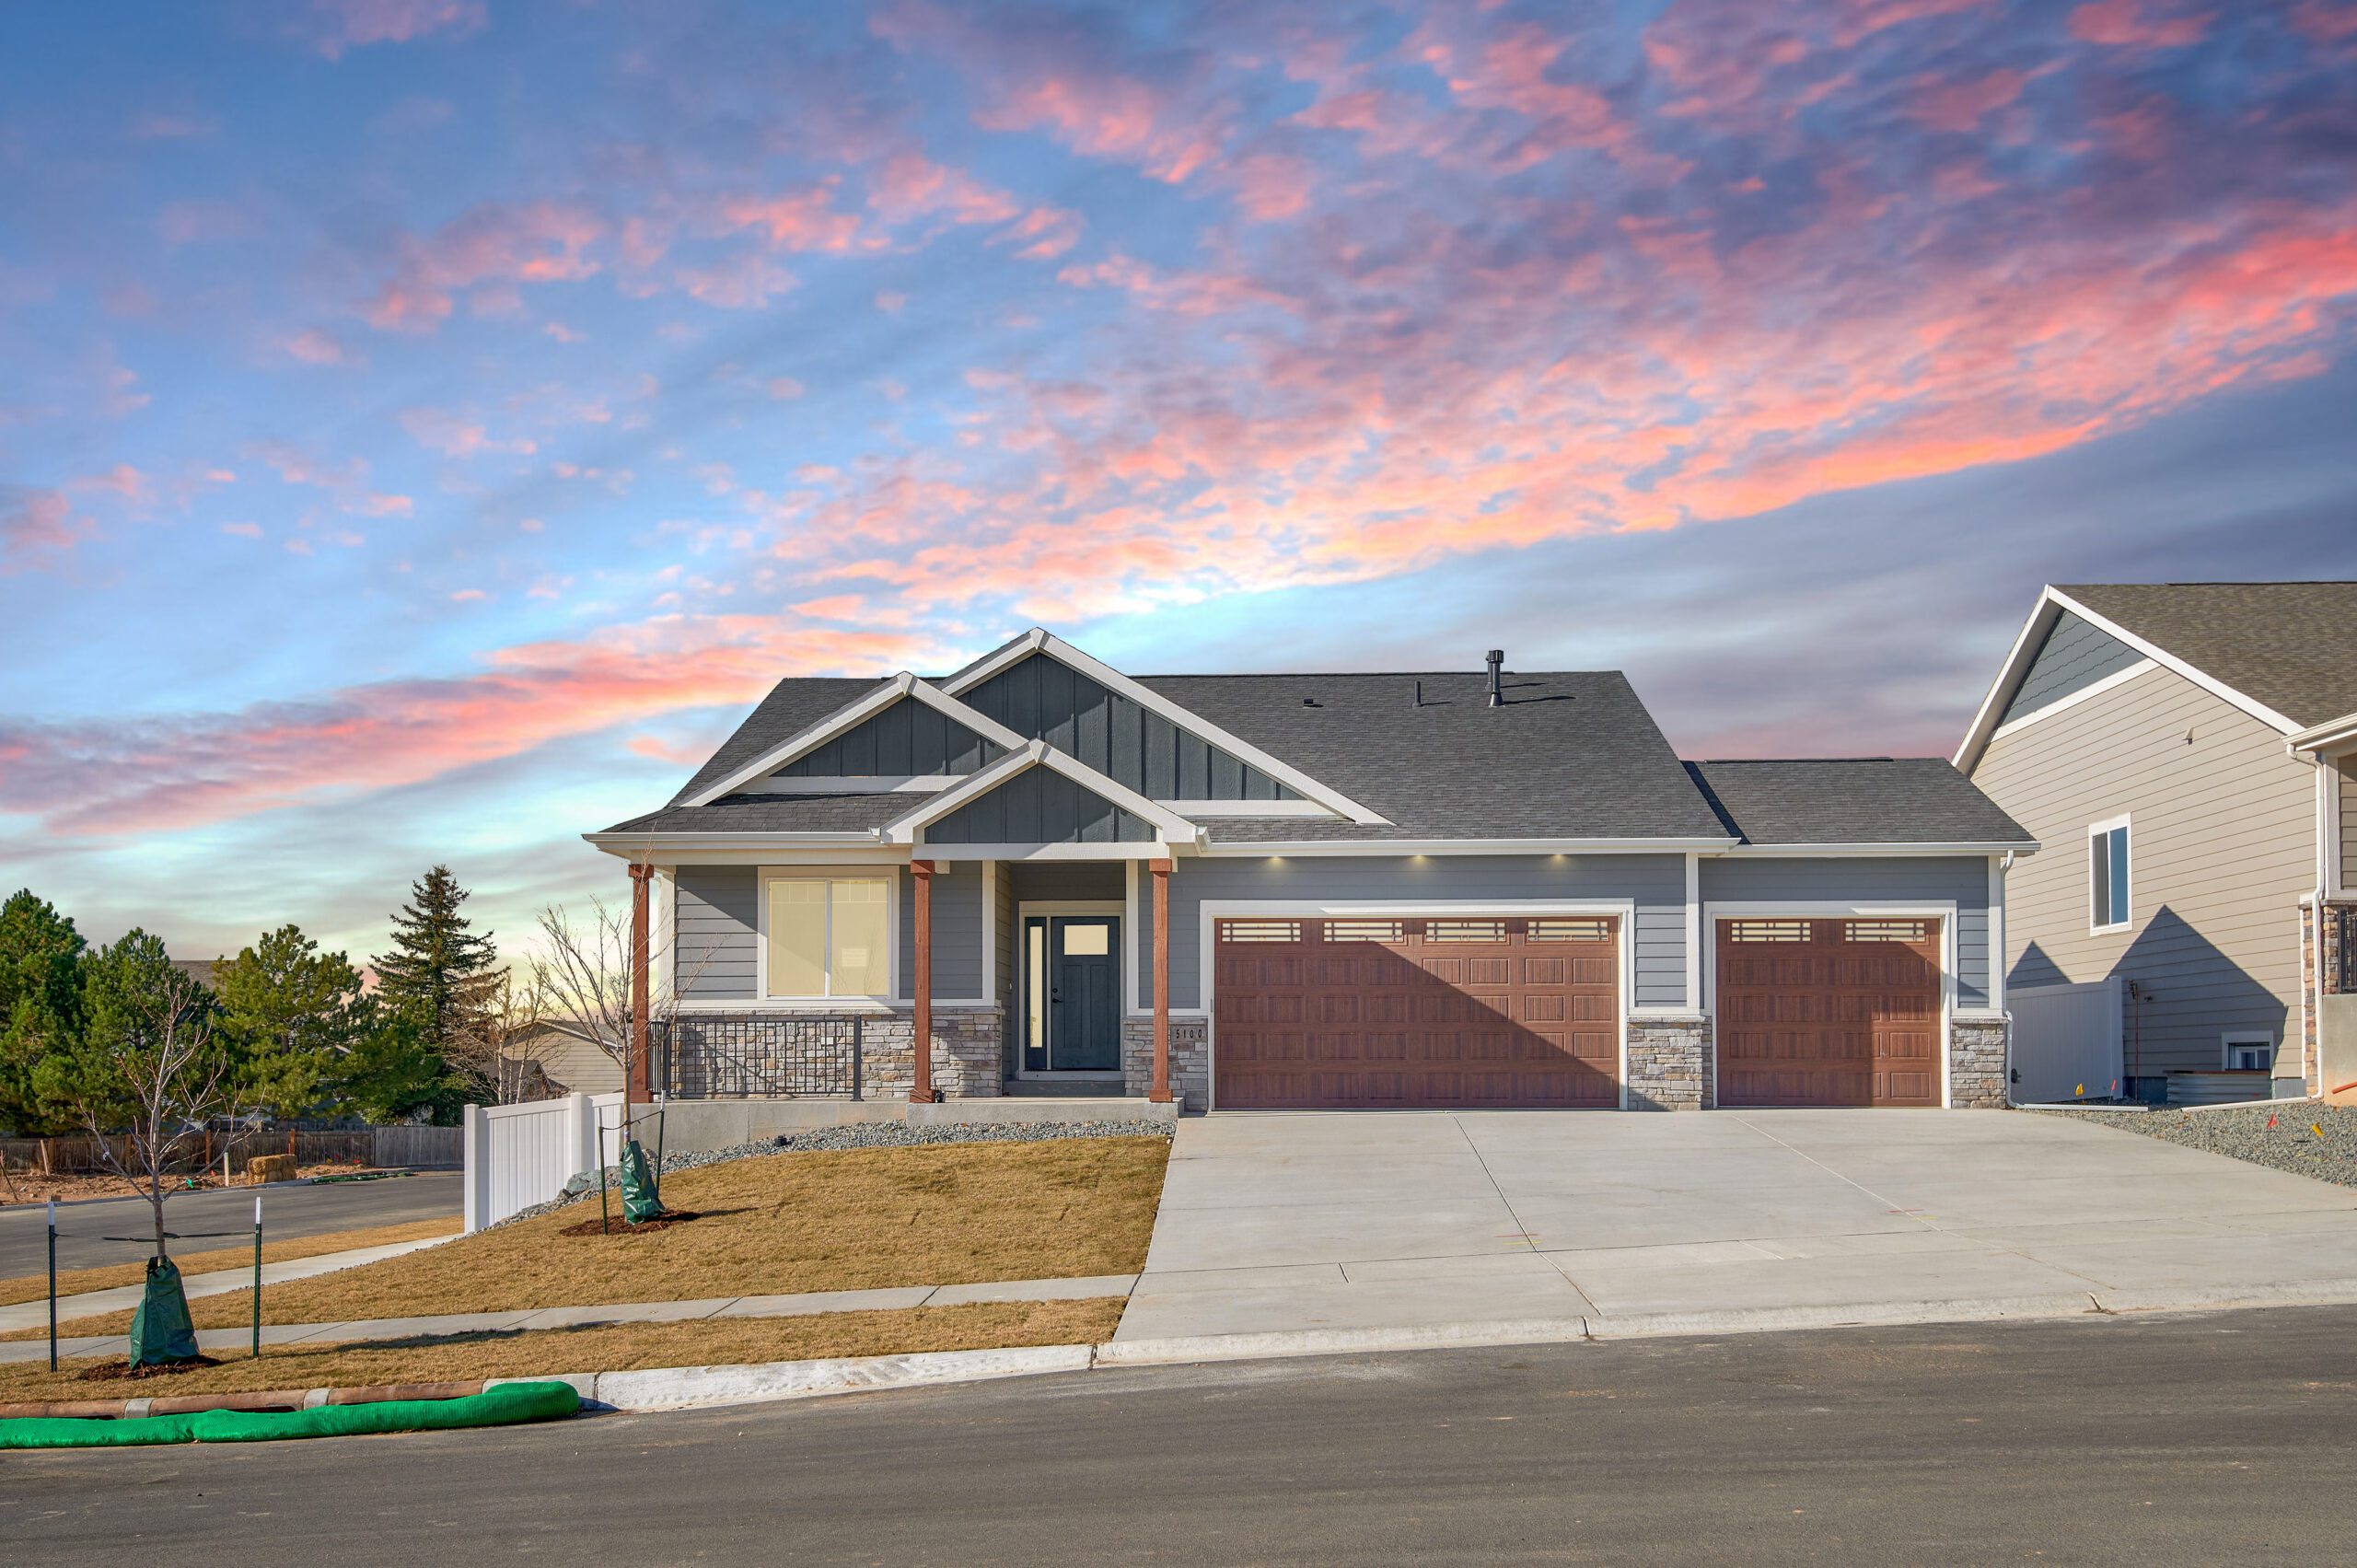 The Mustang ranch home by Homes by Guardian